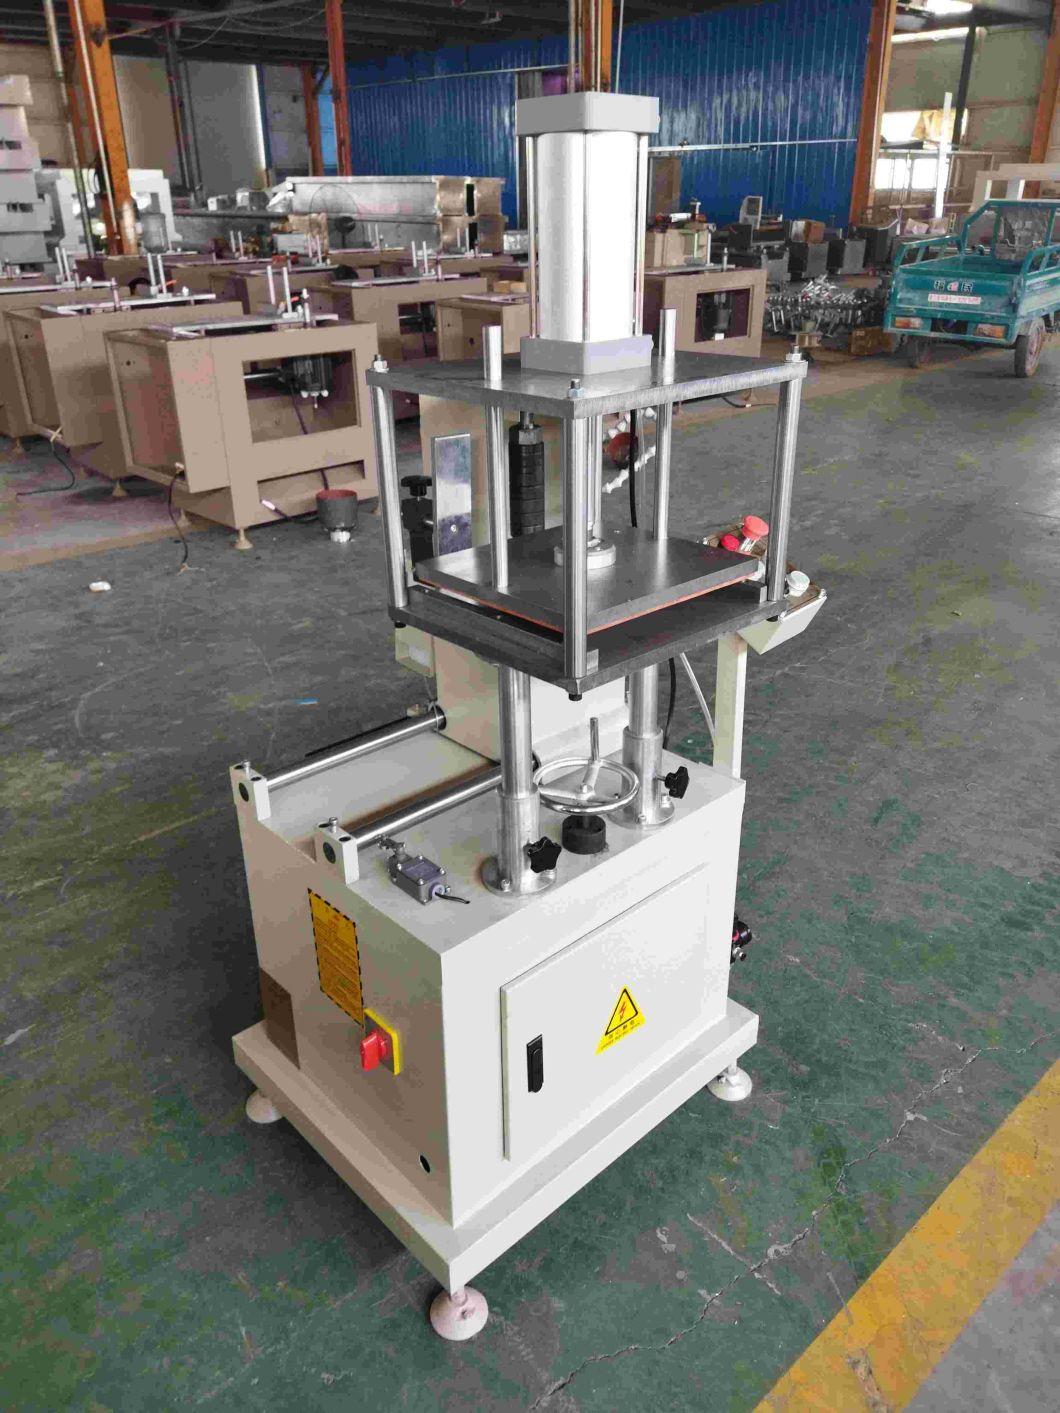 Lxd-200A Aluminum Profile Milling Machine for End Faces Rectangular Grooves CNC Machine for Aluminum Doors and Windows Making CNC Cutter